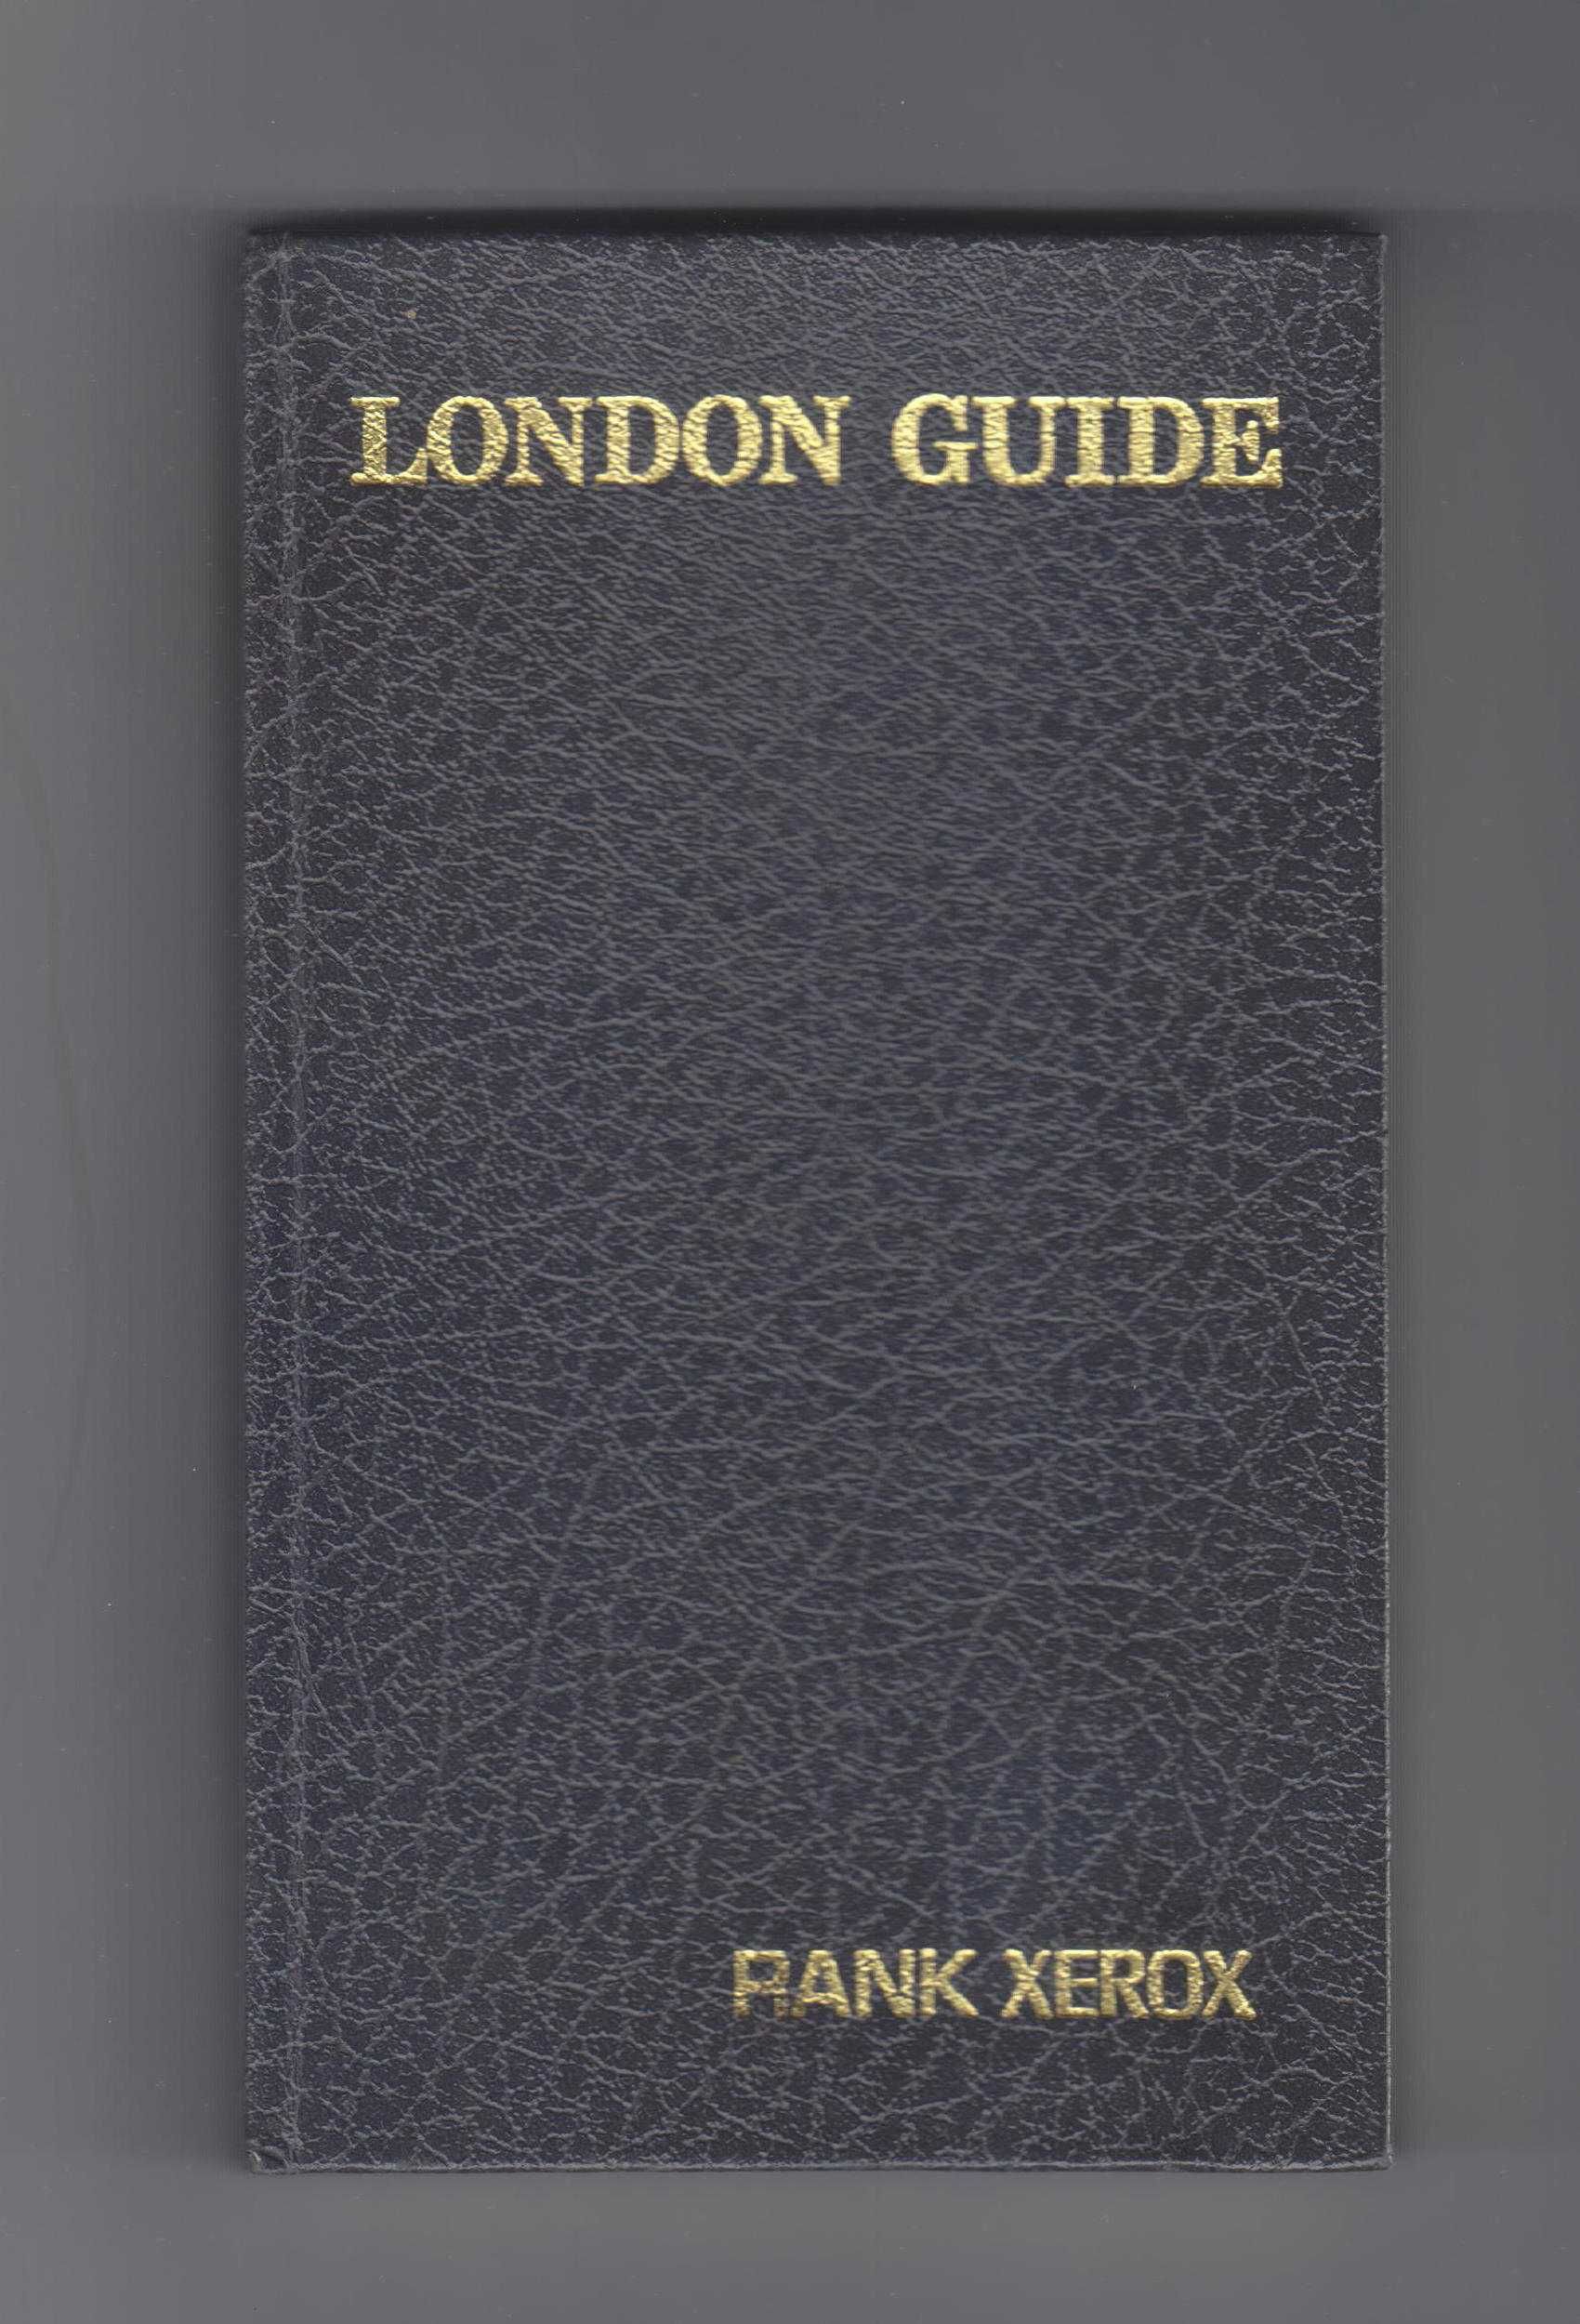 The London guide.